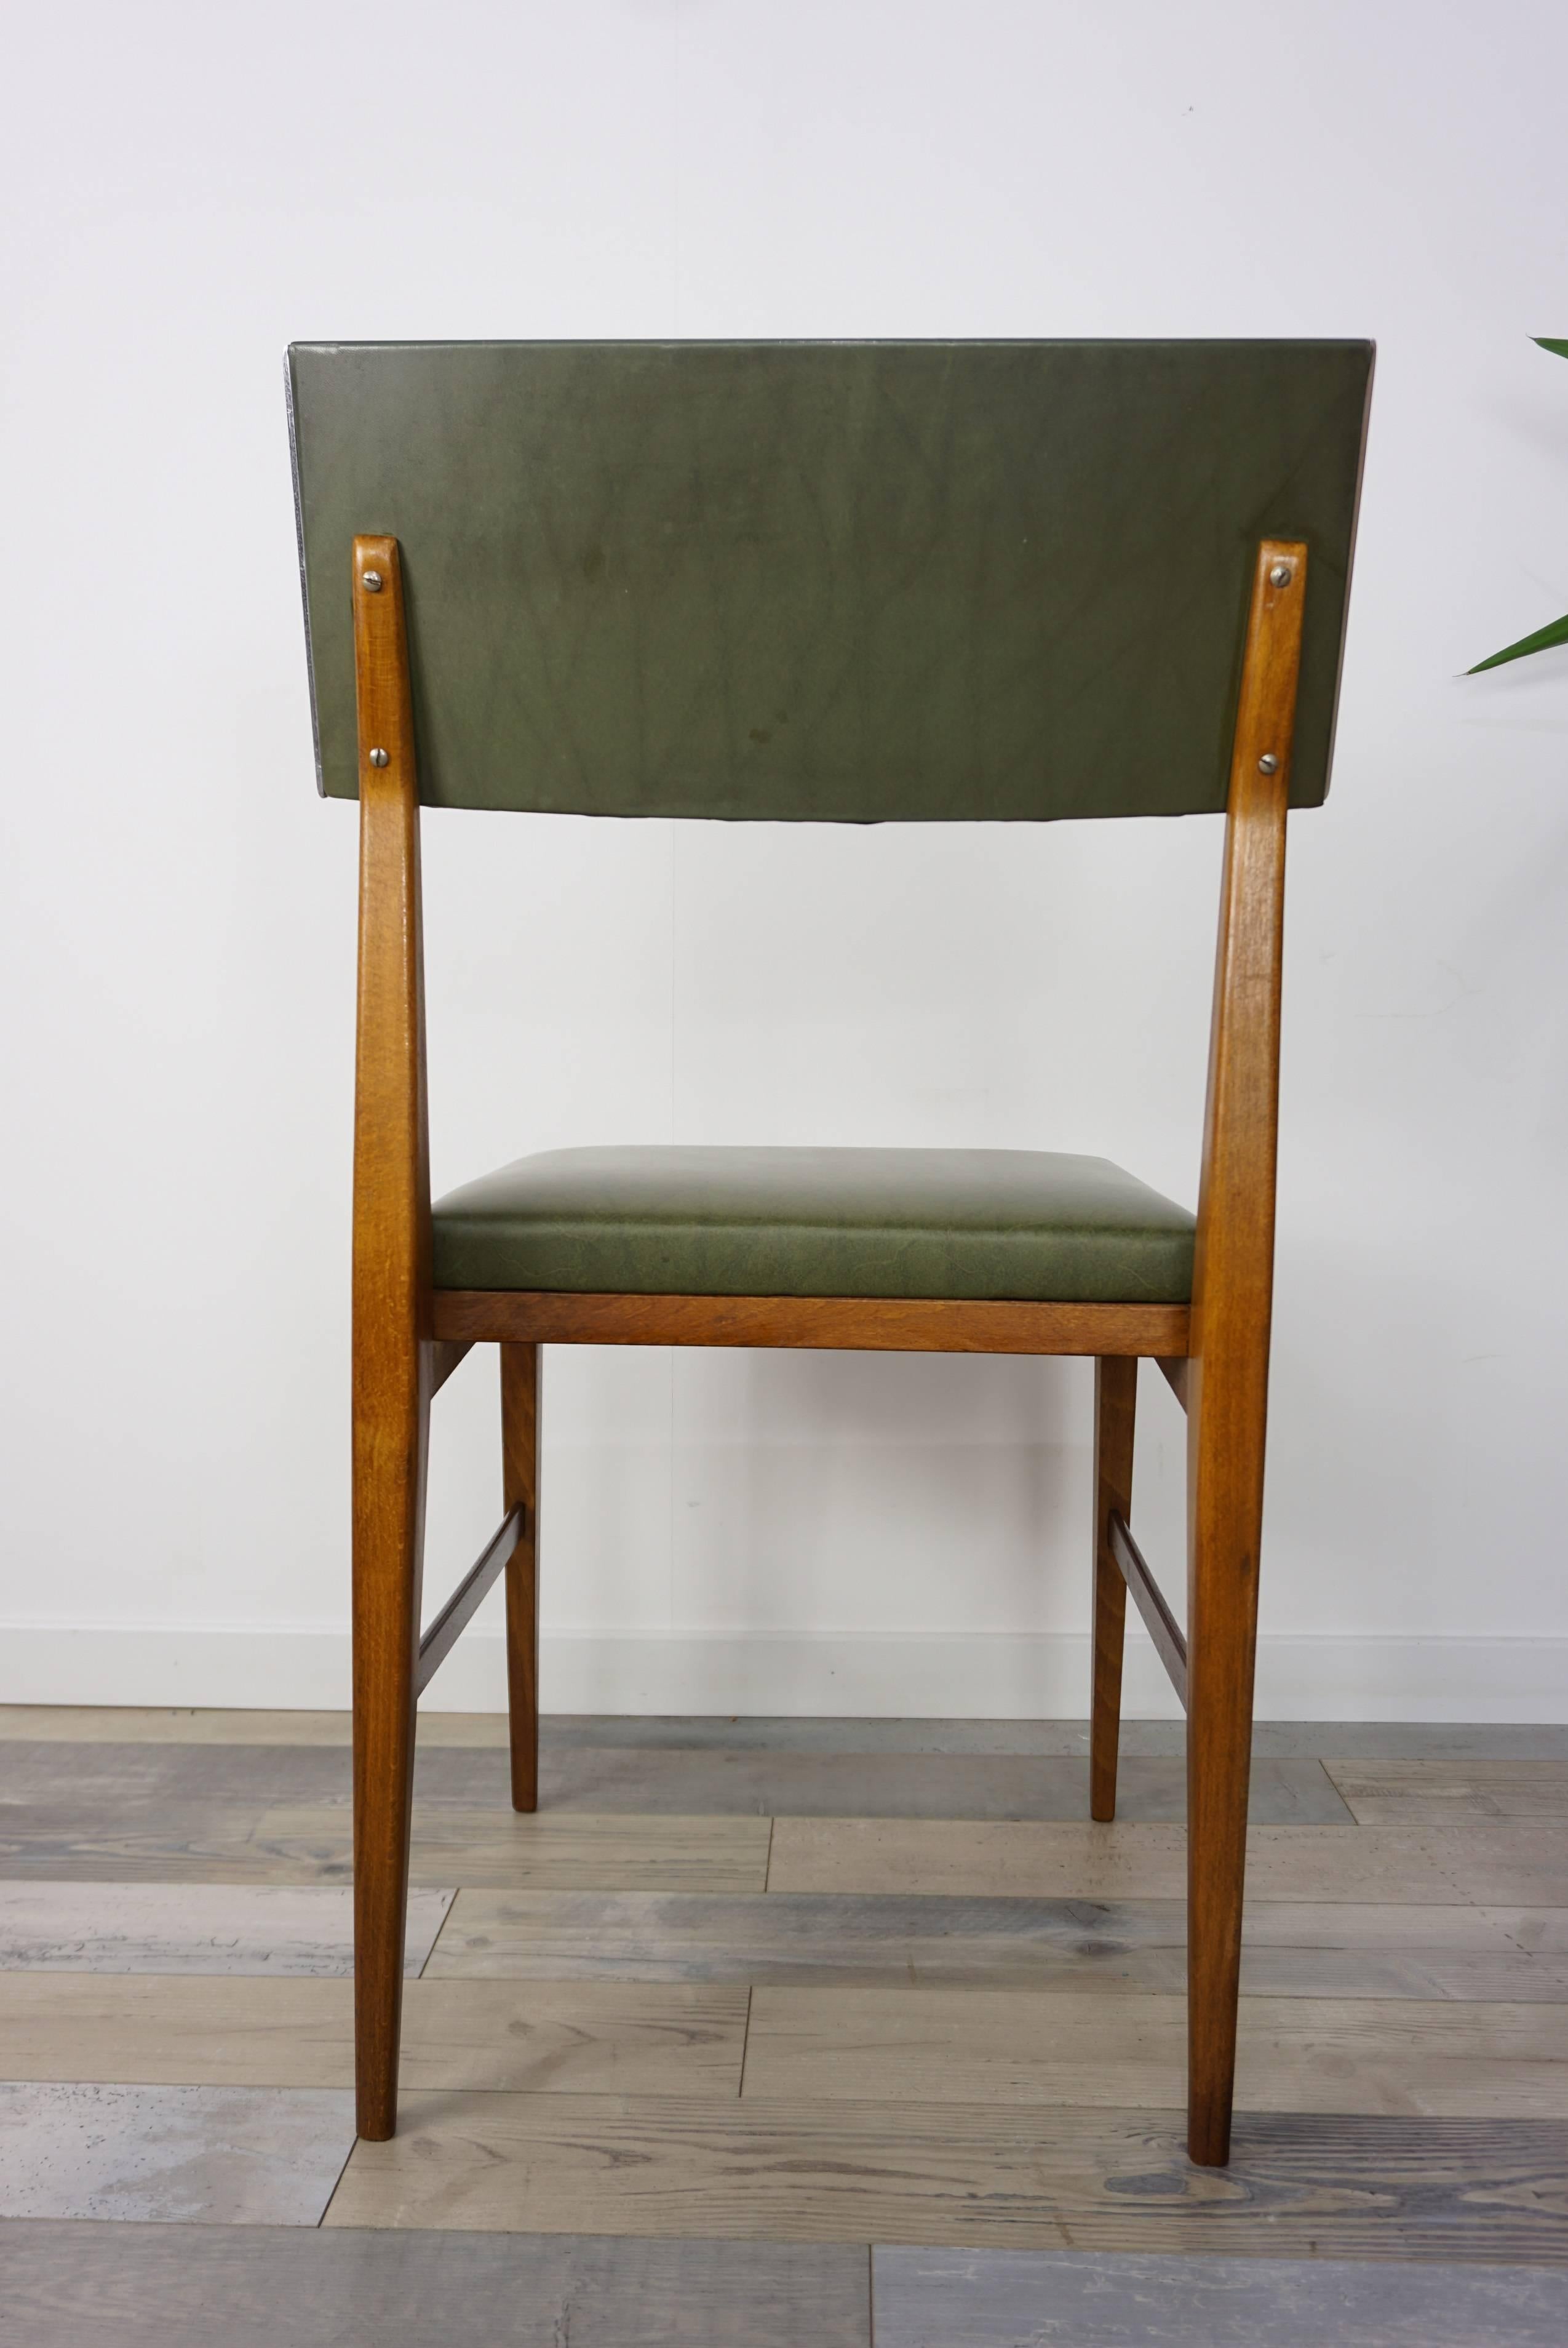 20th Century Wooden Teak and Green Faux Leather Scandinavian Style Dutch Design Chair